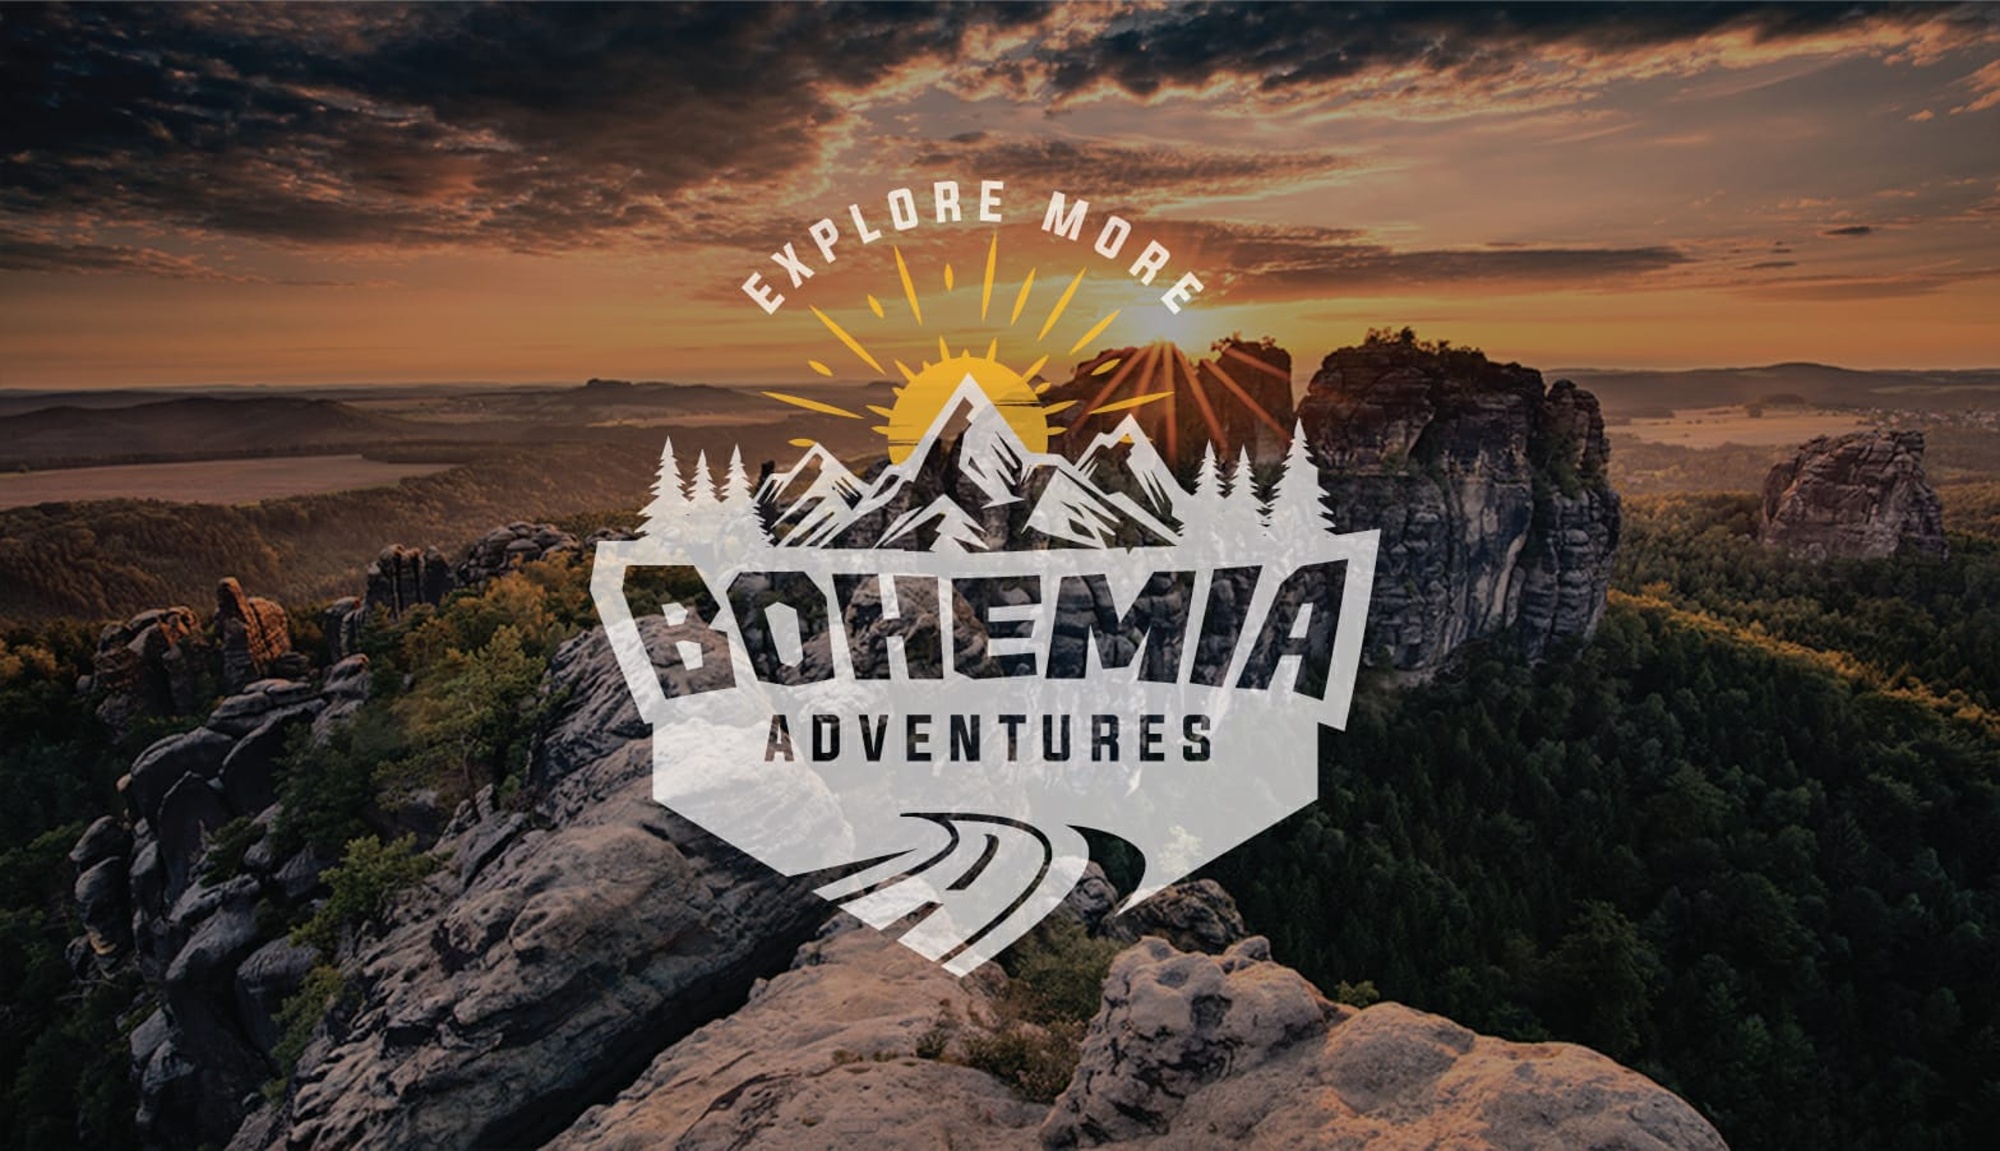 Founding of Bohemia Adventures – Wondering what's our story